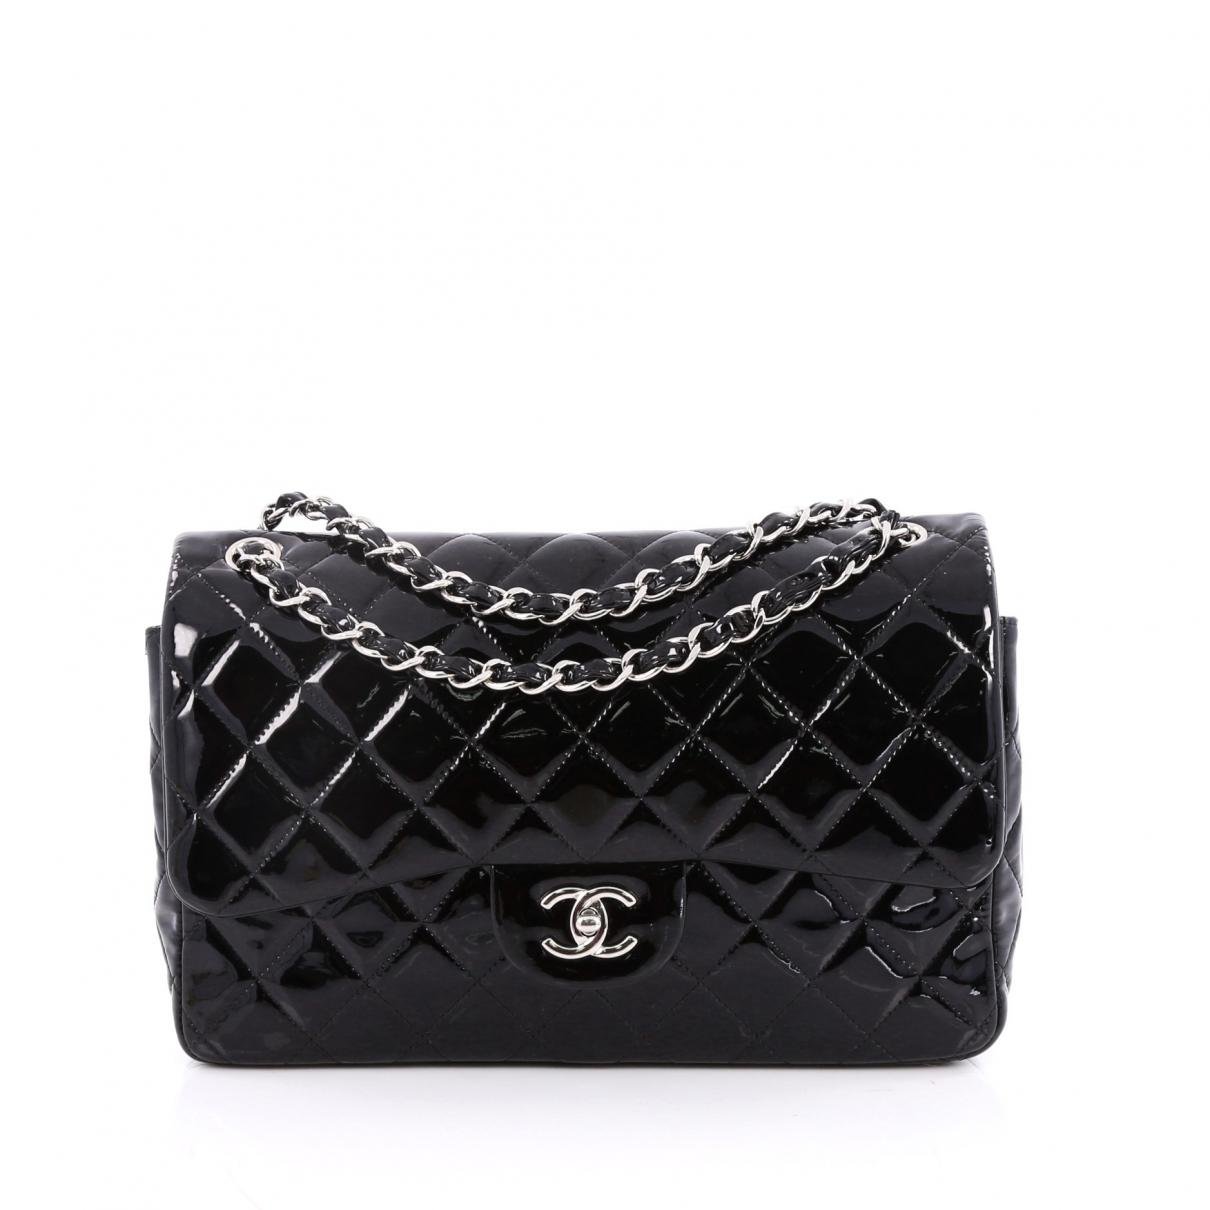 Lyst - Chanel Pre-owned Black Leather Handbag in Black - Save 15%